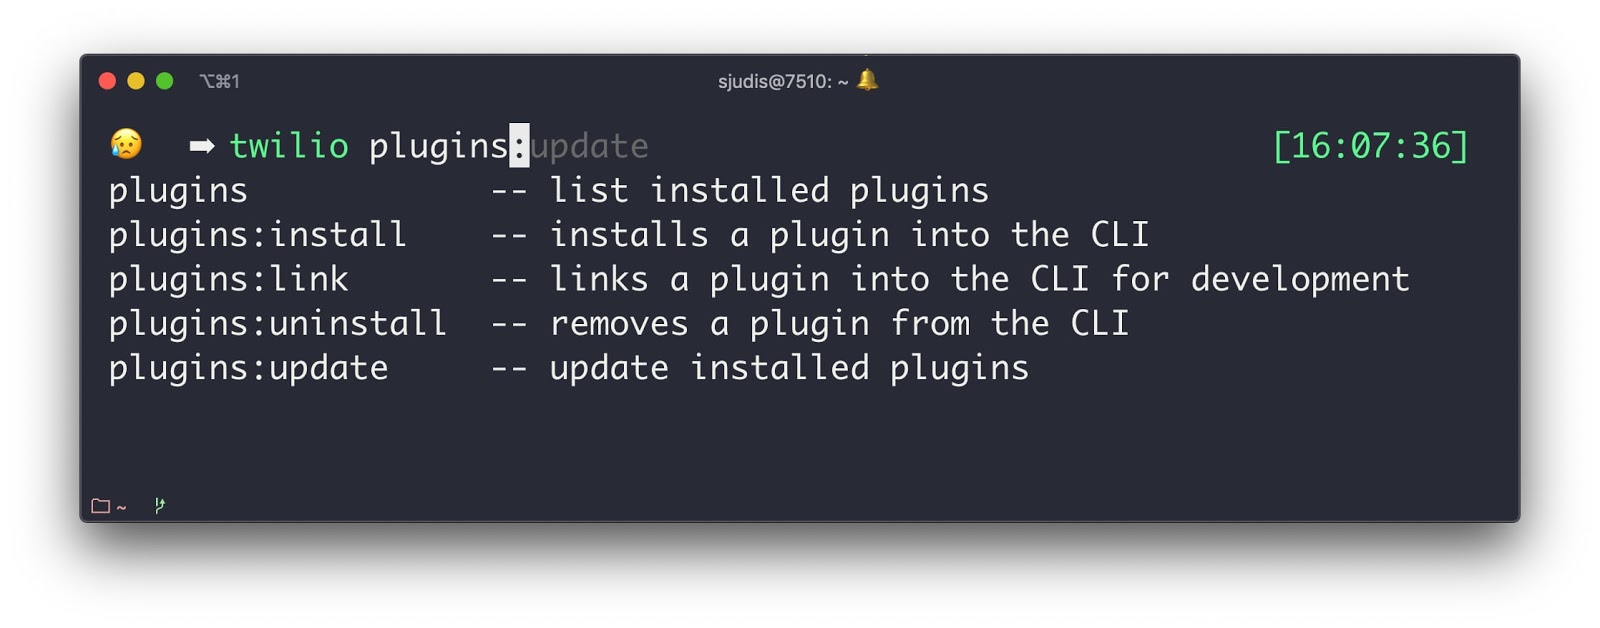 Completion of `twilio plugins + <TAB>` showing install, uninstall and update functionality